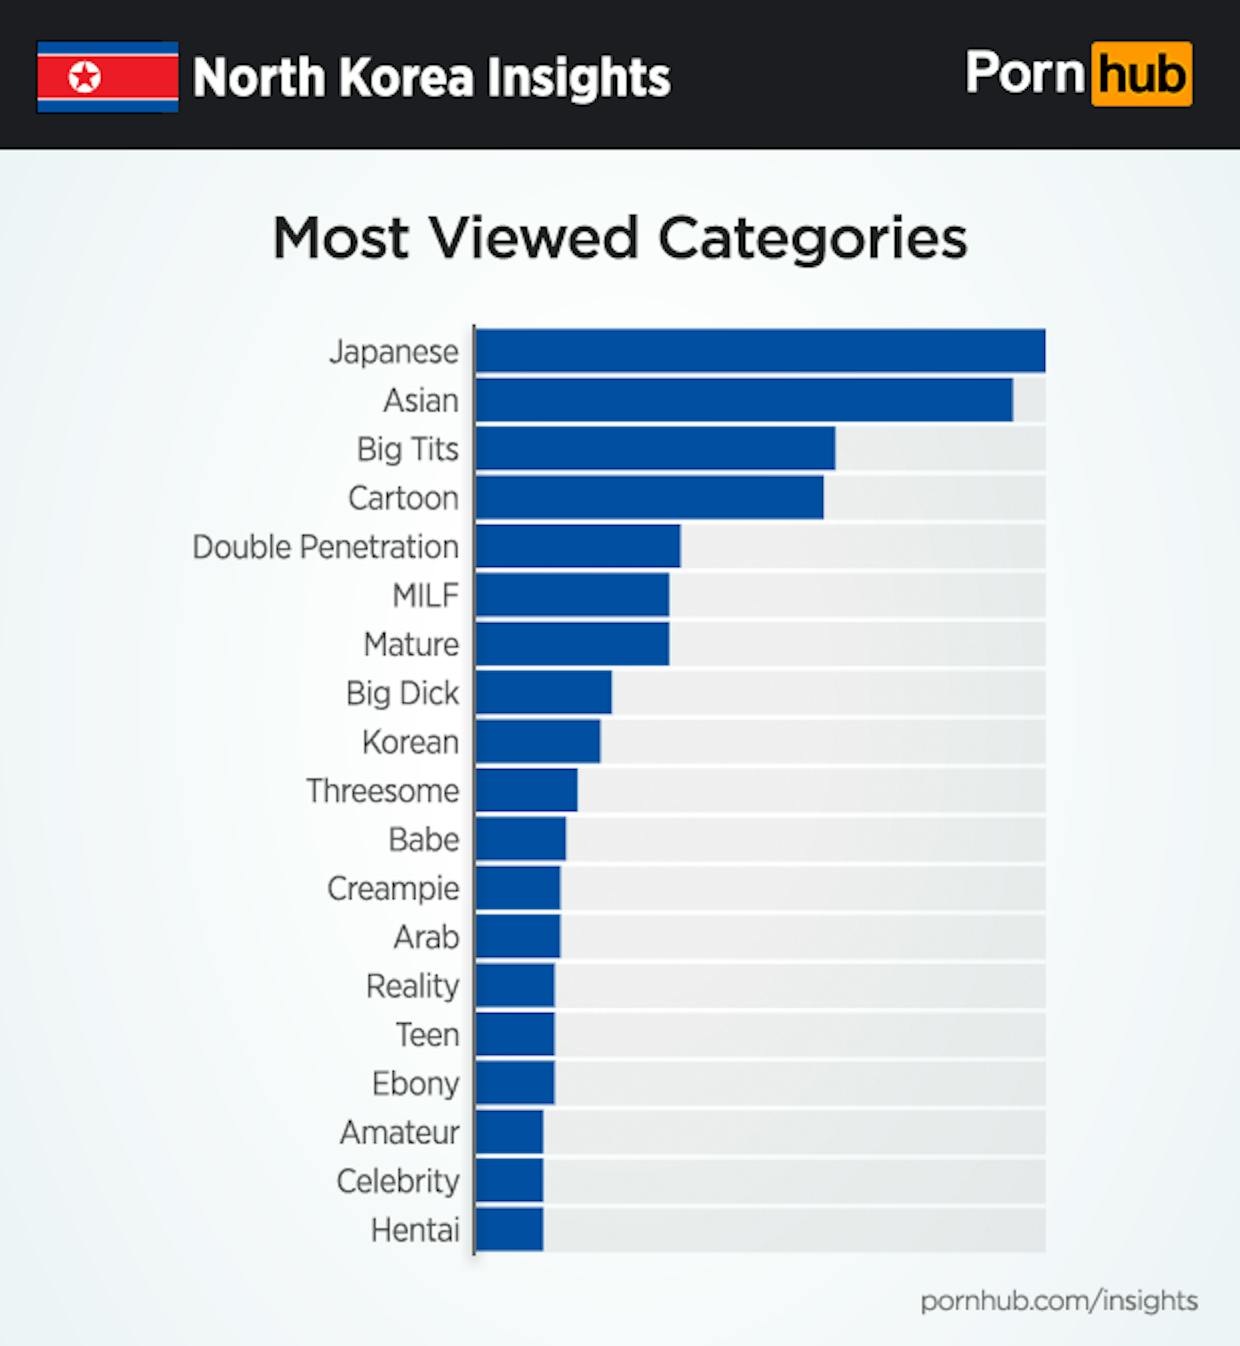 North Korea Porn Sites - Pornhub Just Released New Data on What North Koreans Watch ...